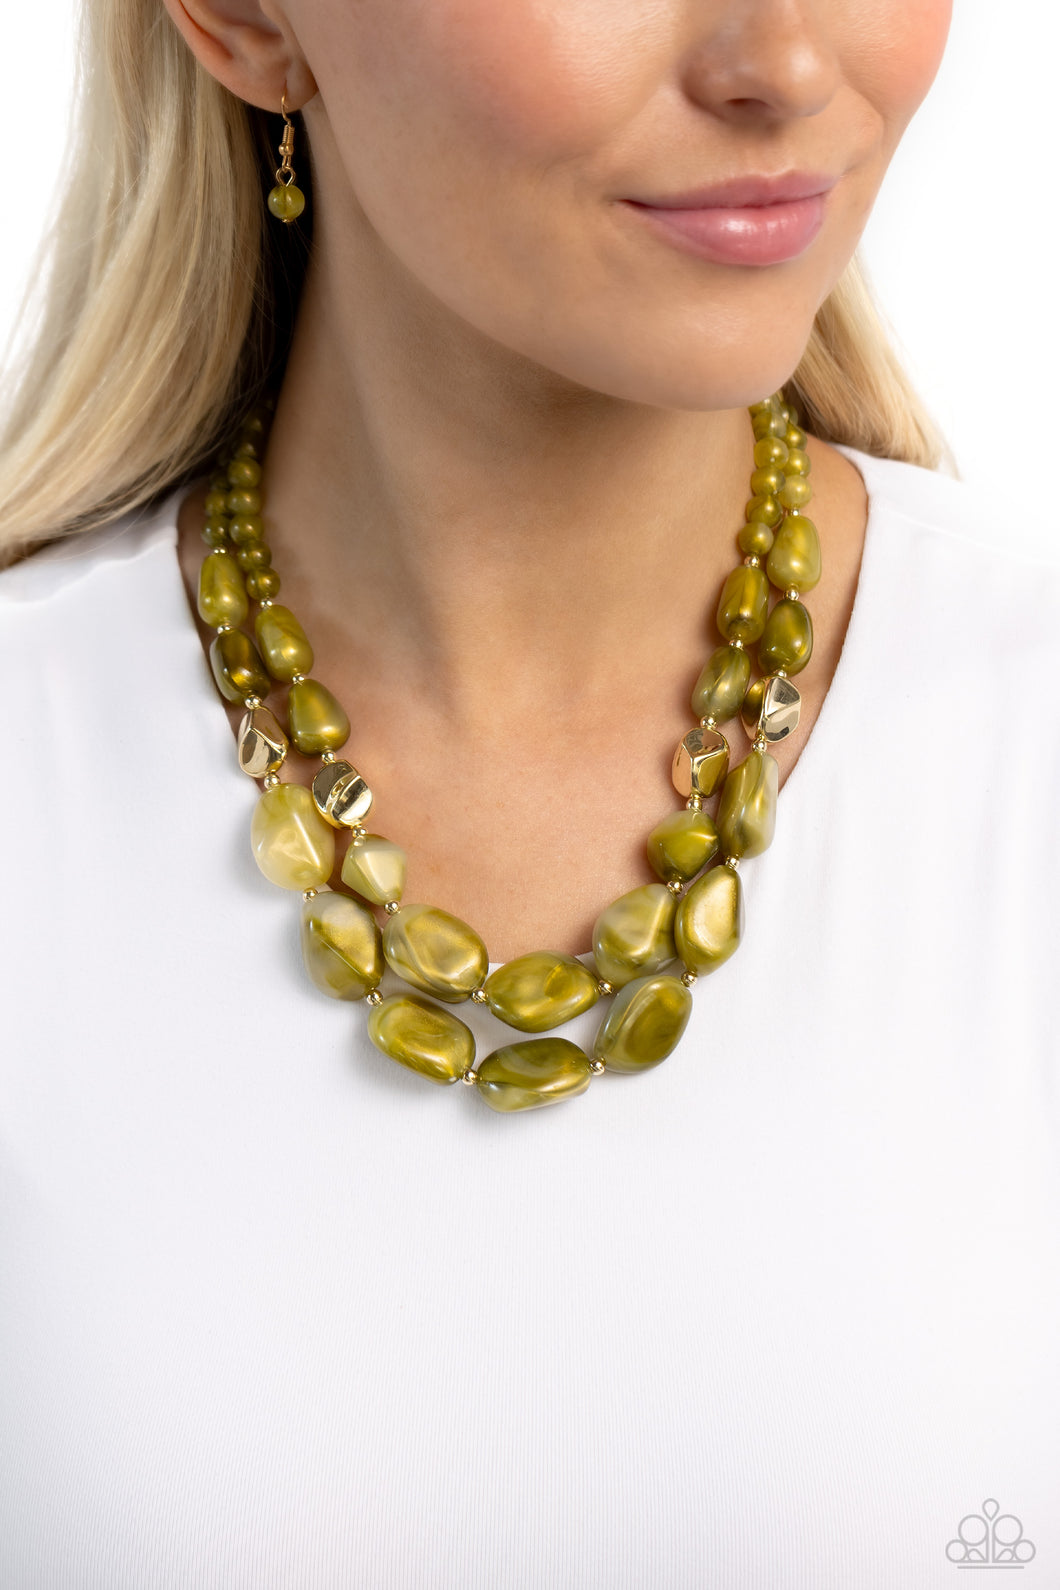 Varying in shape and opacity, a refreshing collection of sparkle-infused green beads layer below the collar for a boldly colorful look. Accents of faceted gold beads and gold studs are infused throughout the design for a subtle touch of additional sheen. Features an adjustable clasp closure.  Sold as one individual necklace. Includes one pair of matching earrings.